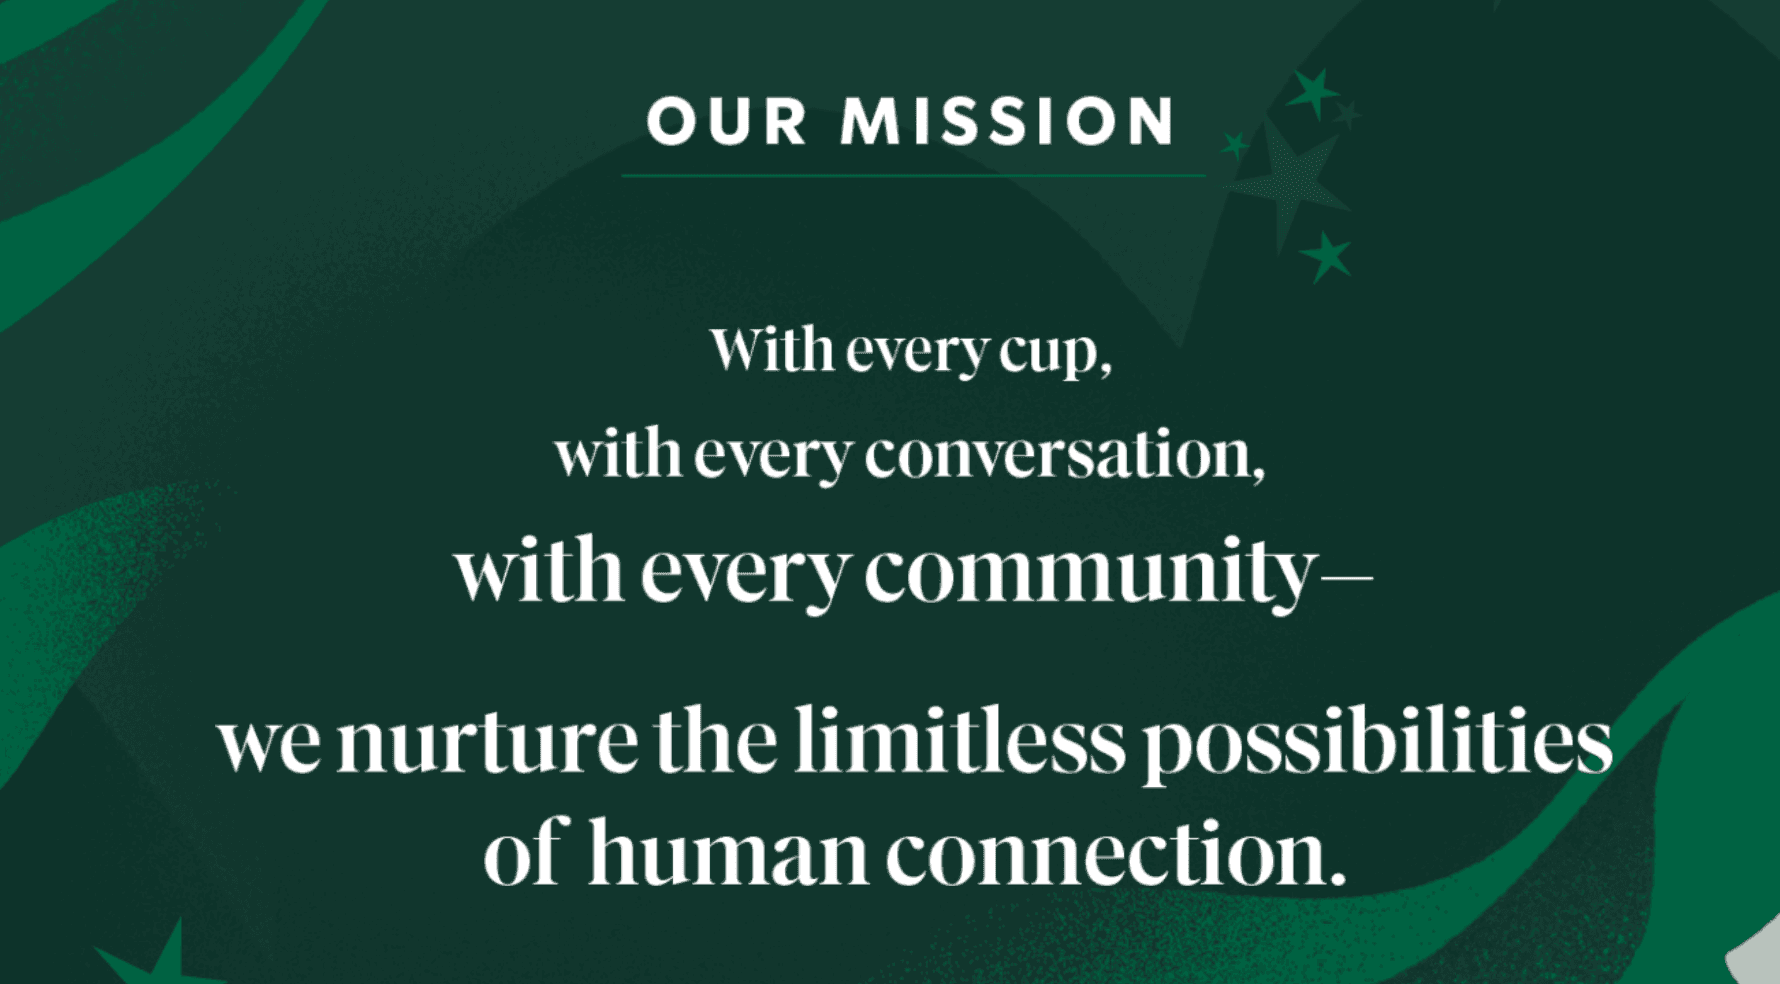 Our mission - With every cup, with every conversation, with every community, we nurture the limitless possibilities of human connection.